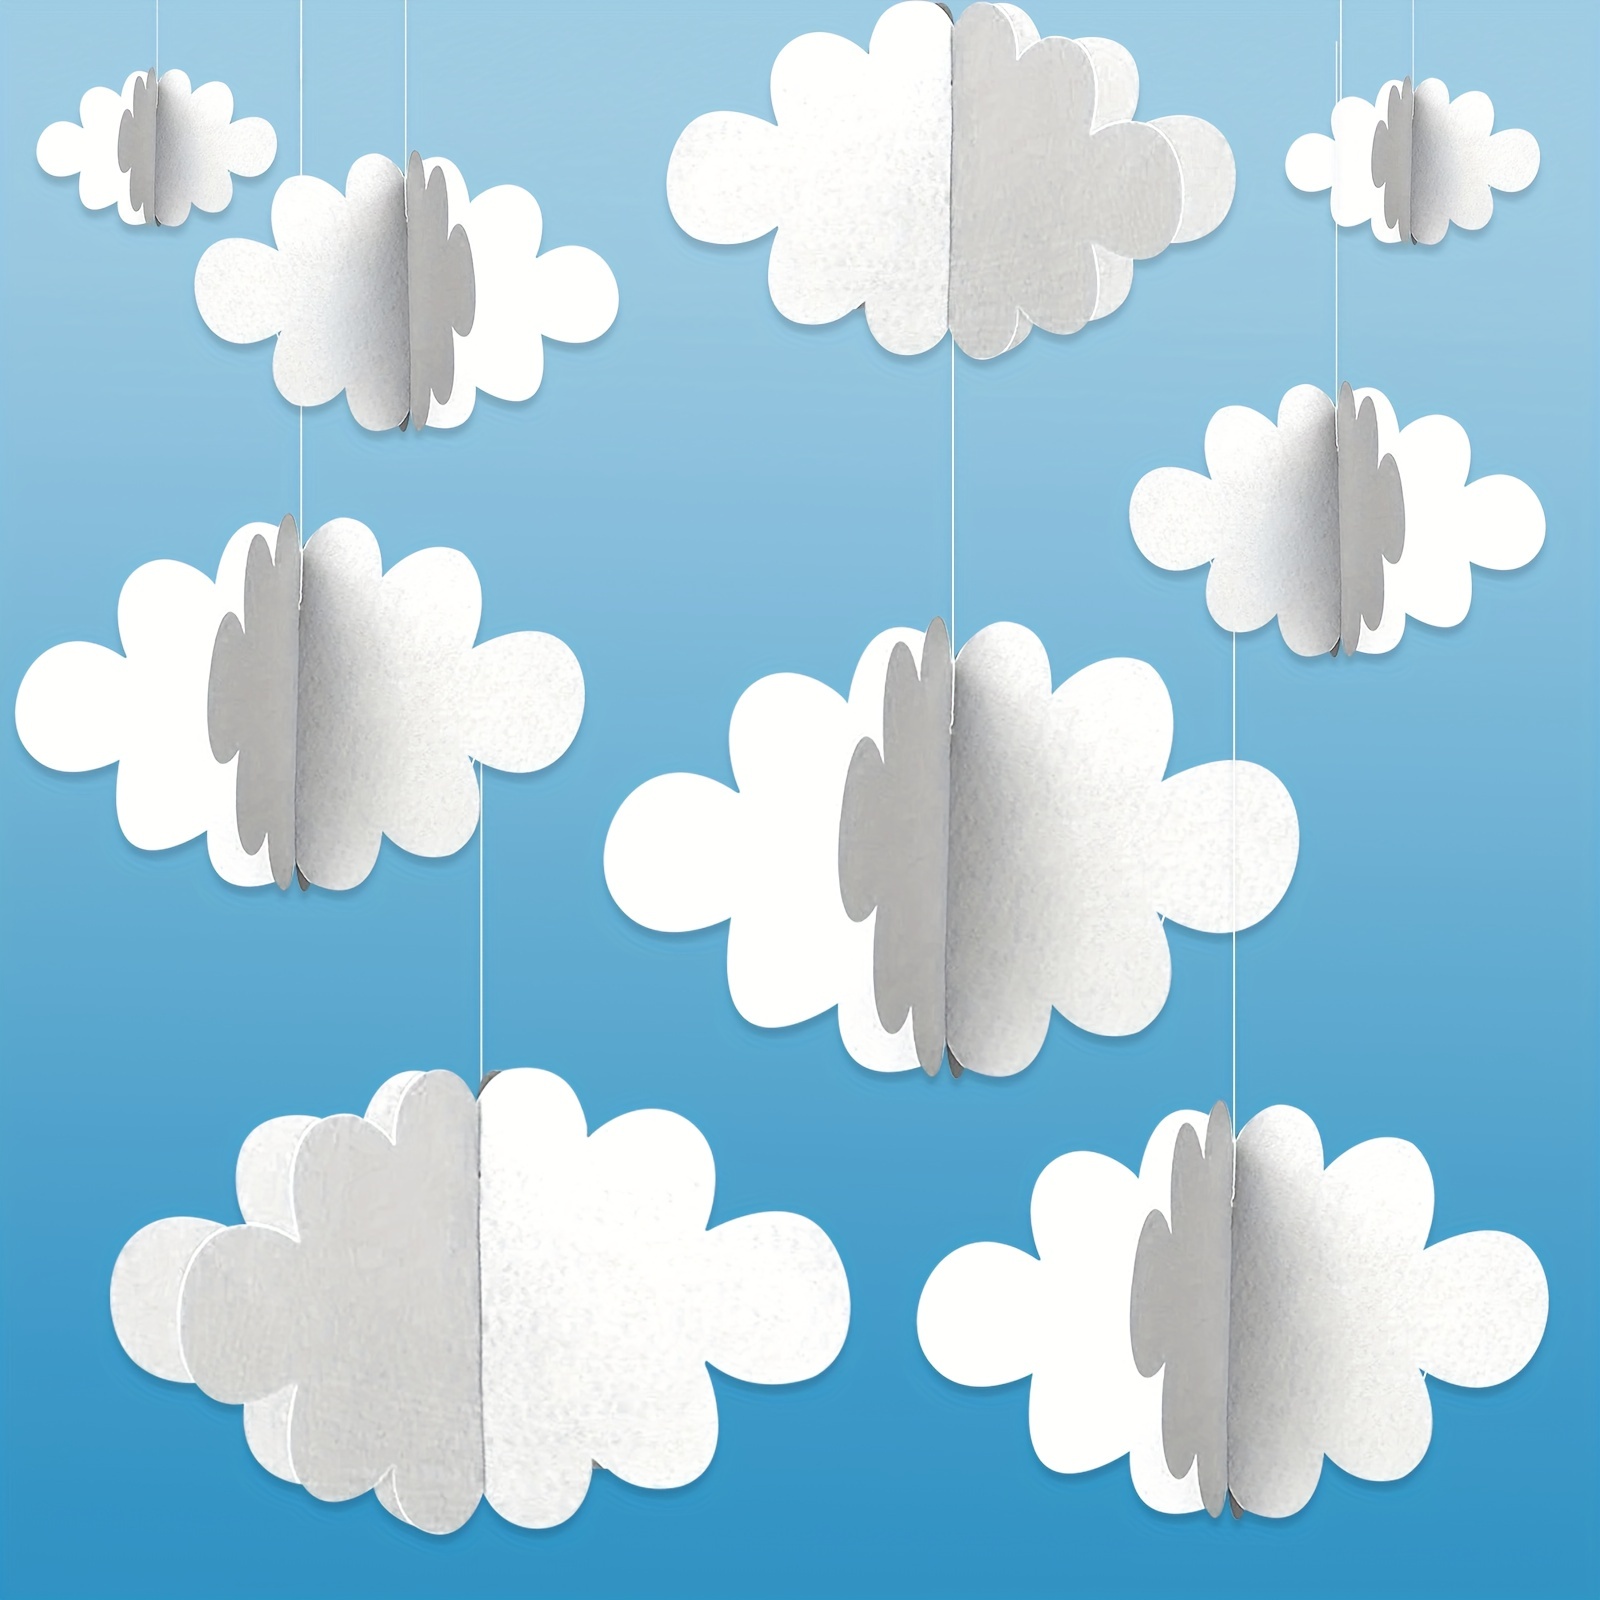 14 Pcs Artificial Cloud Props Cloud Ceiling Decor Clouds for Decoration  with Paper Raindrop Decorations for DIY Decorative Hanging Ornament Home  Wall